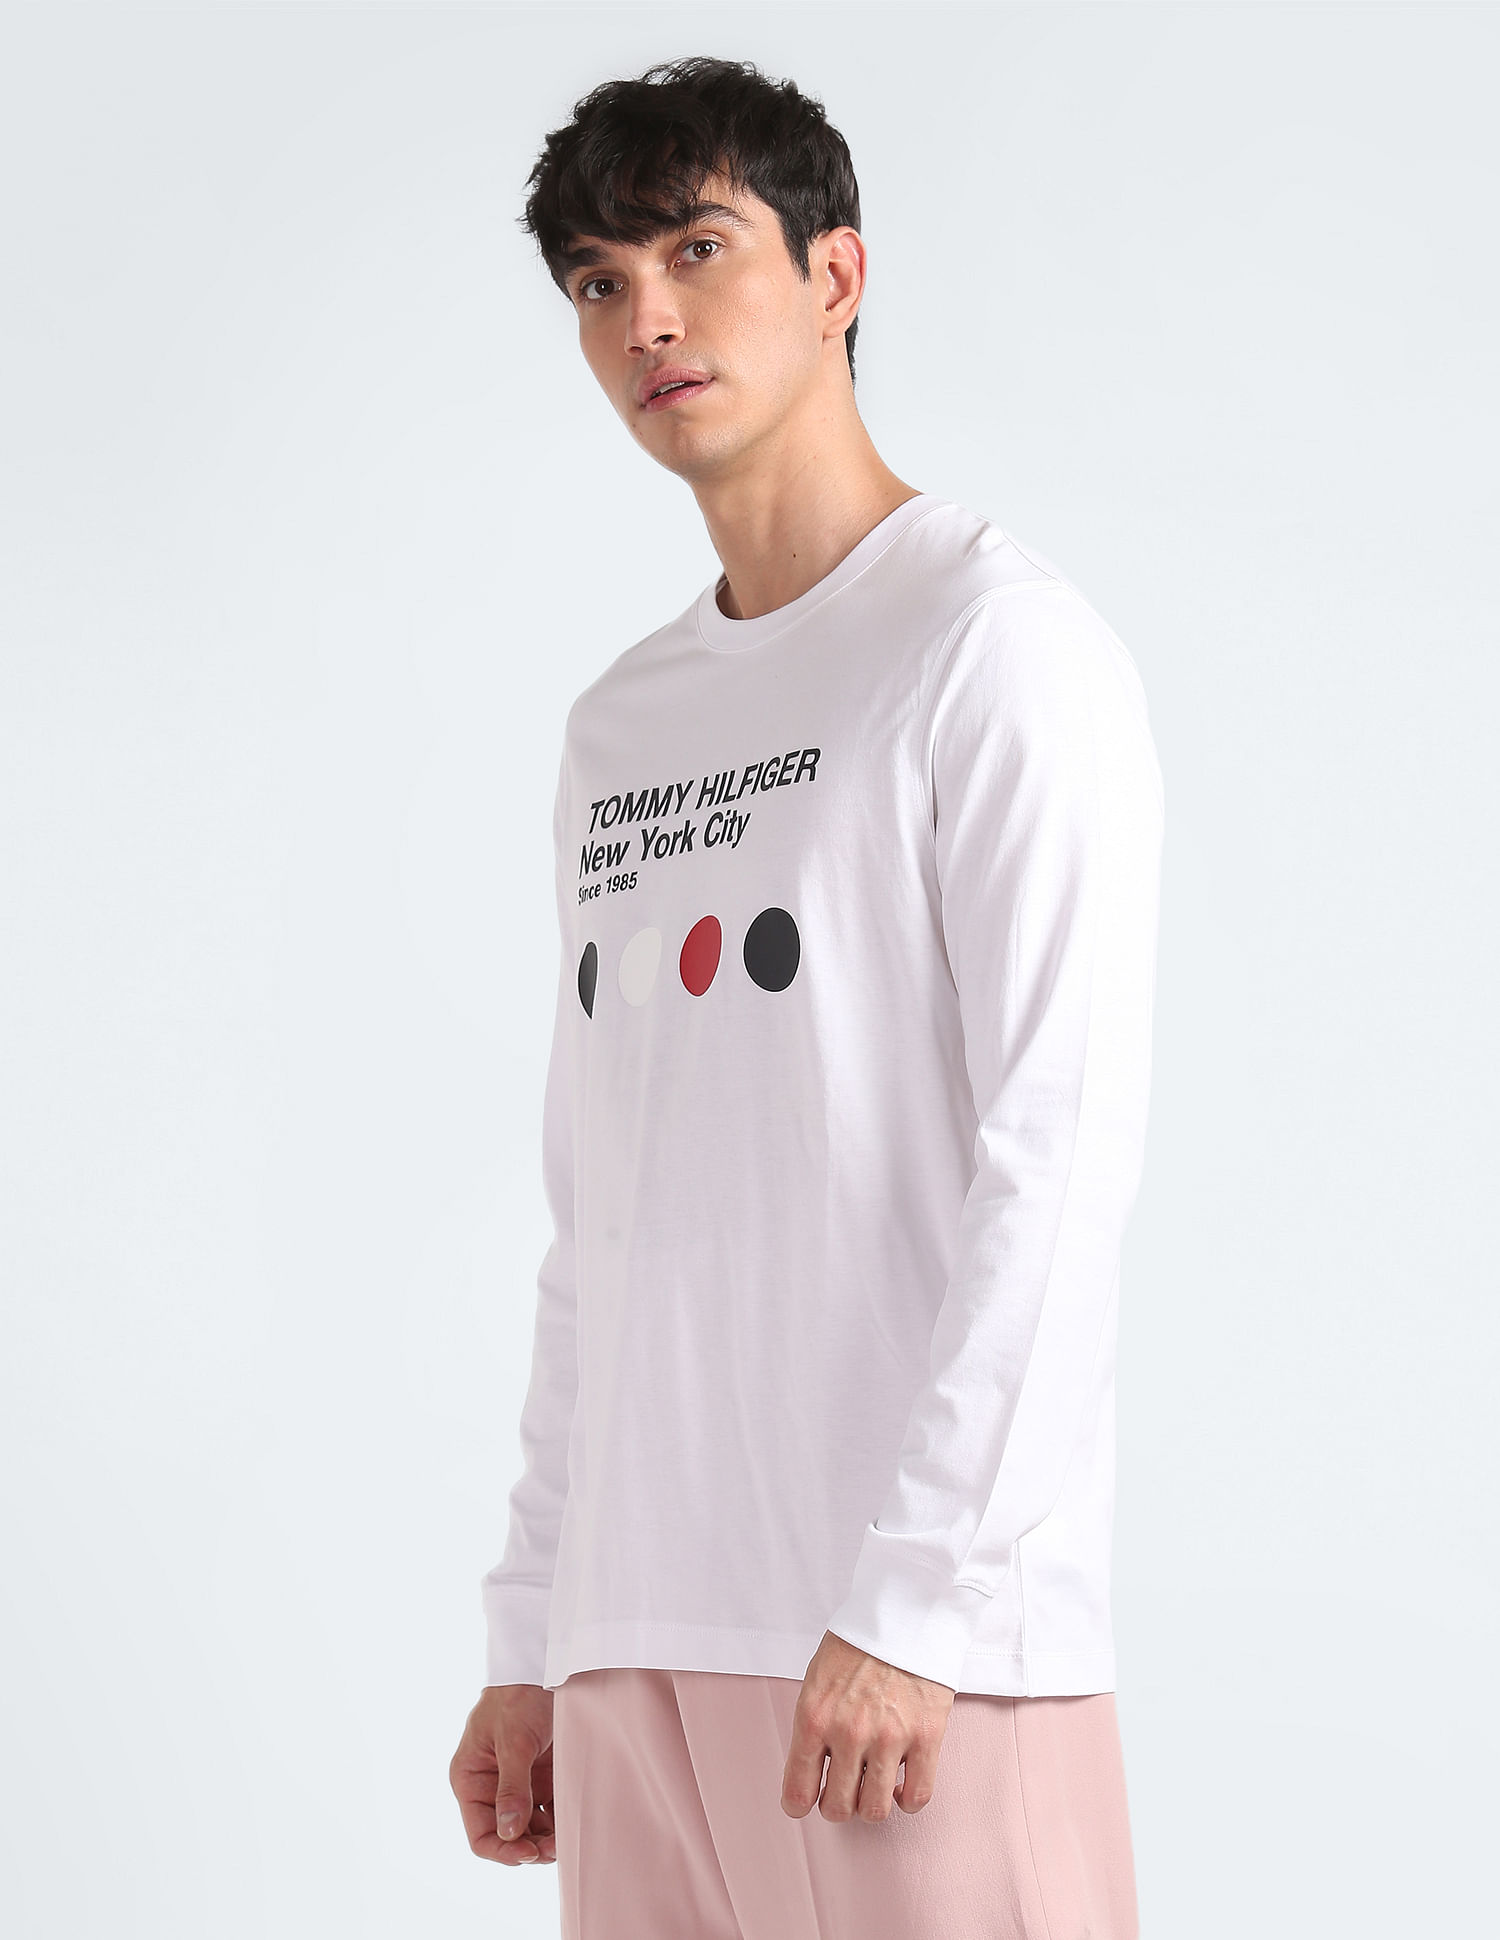 Buy Tommy Long Typographic Sleeve Print Hilfiger T-Shirt